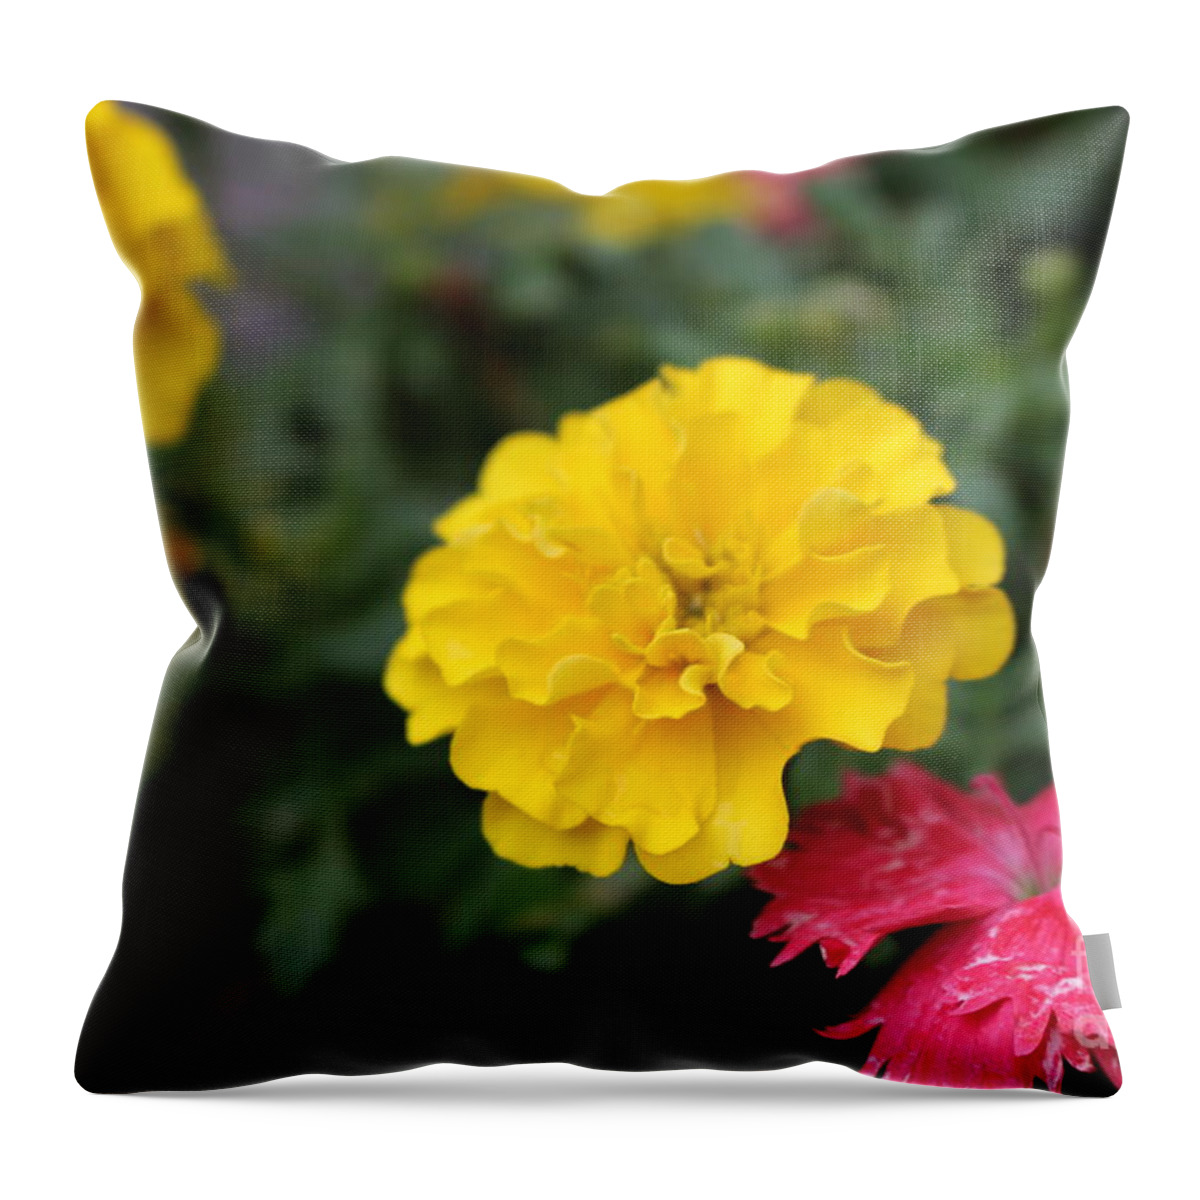 Everything Is Blooming Throw Pillow featuring the photograph Everything Is Blooming by Barbra Telfer